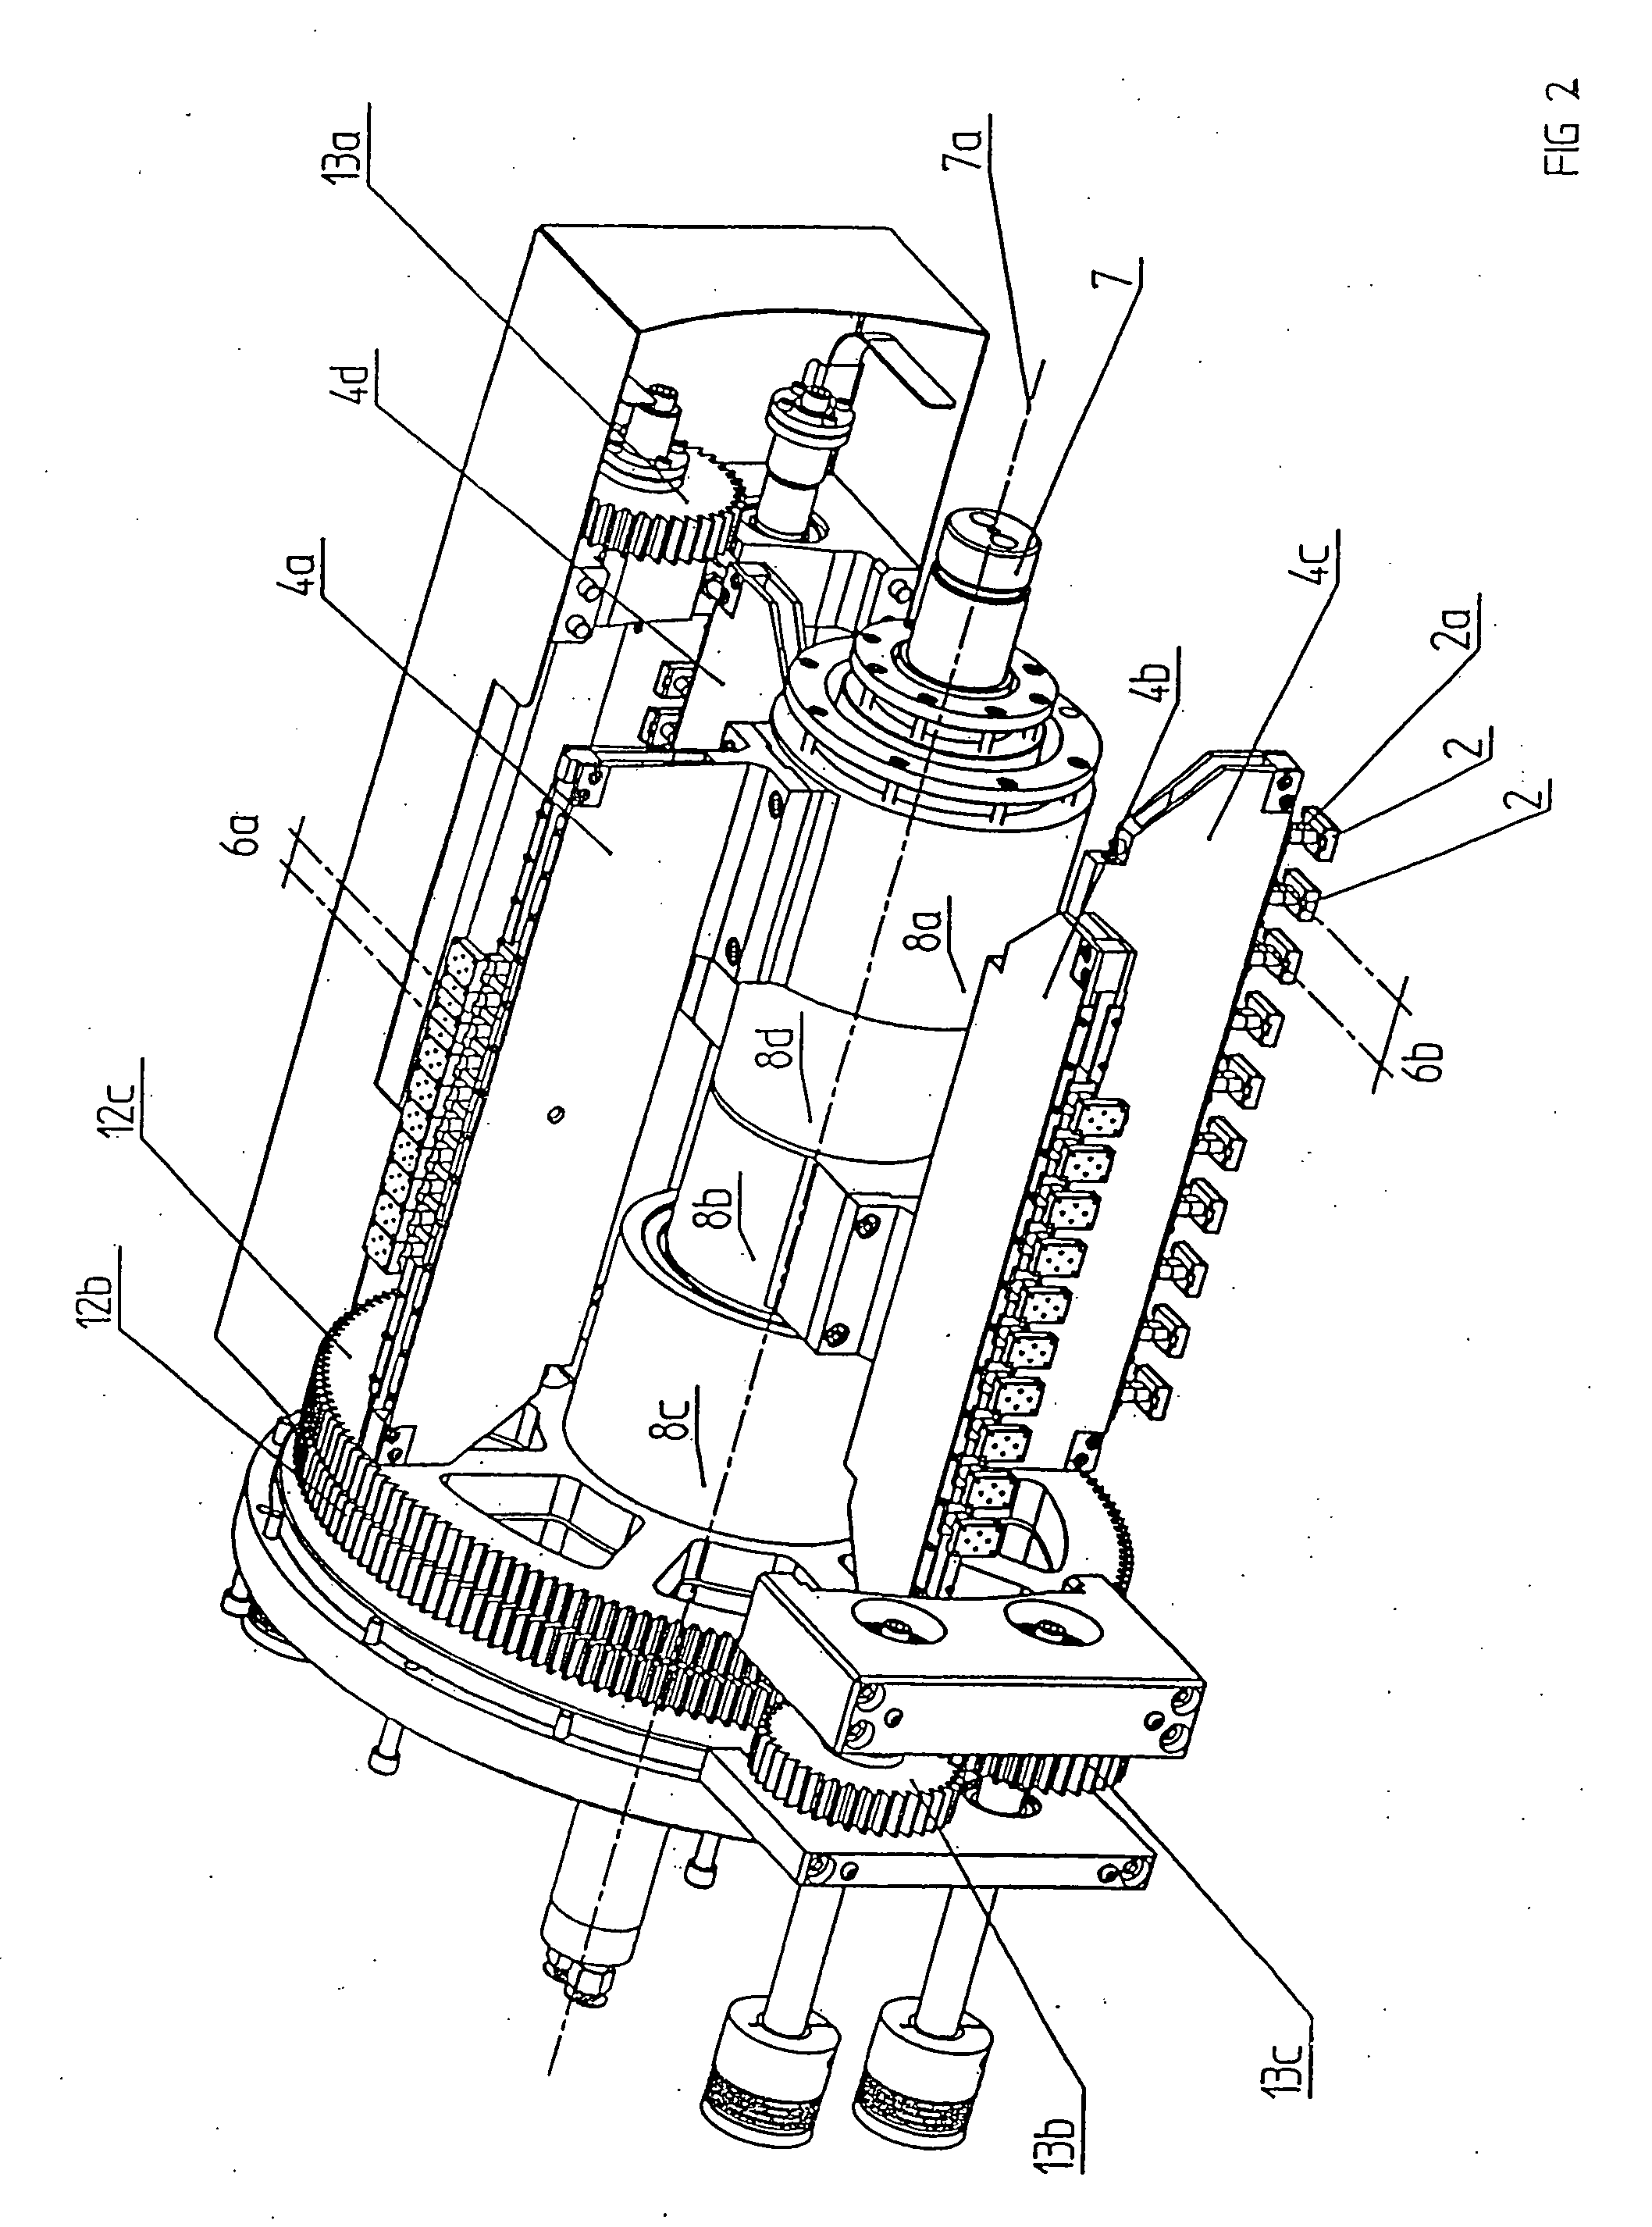 Apparatus for separating parts